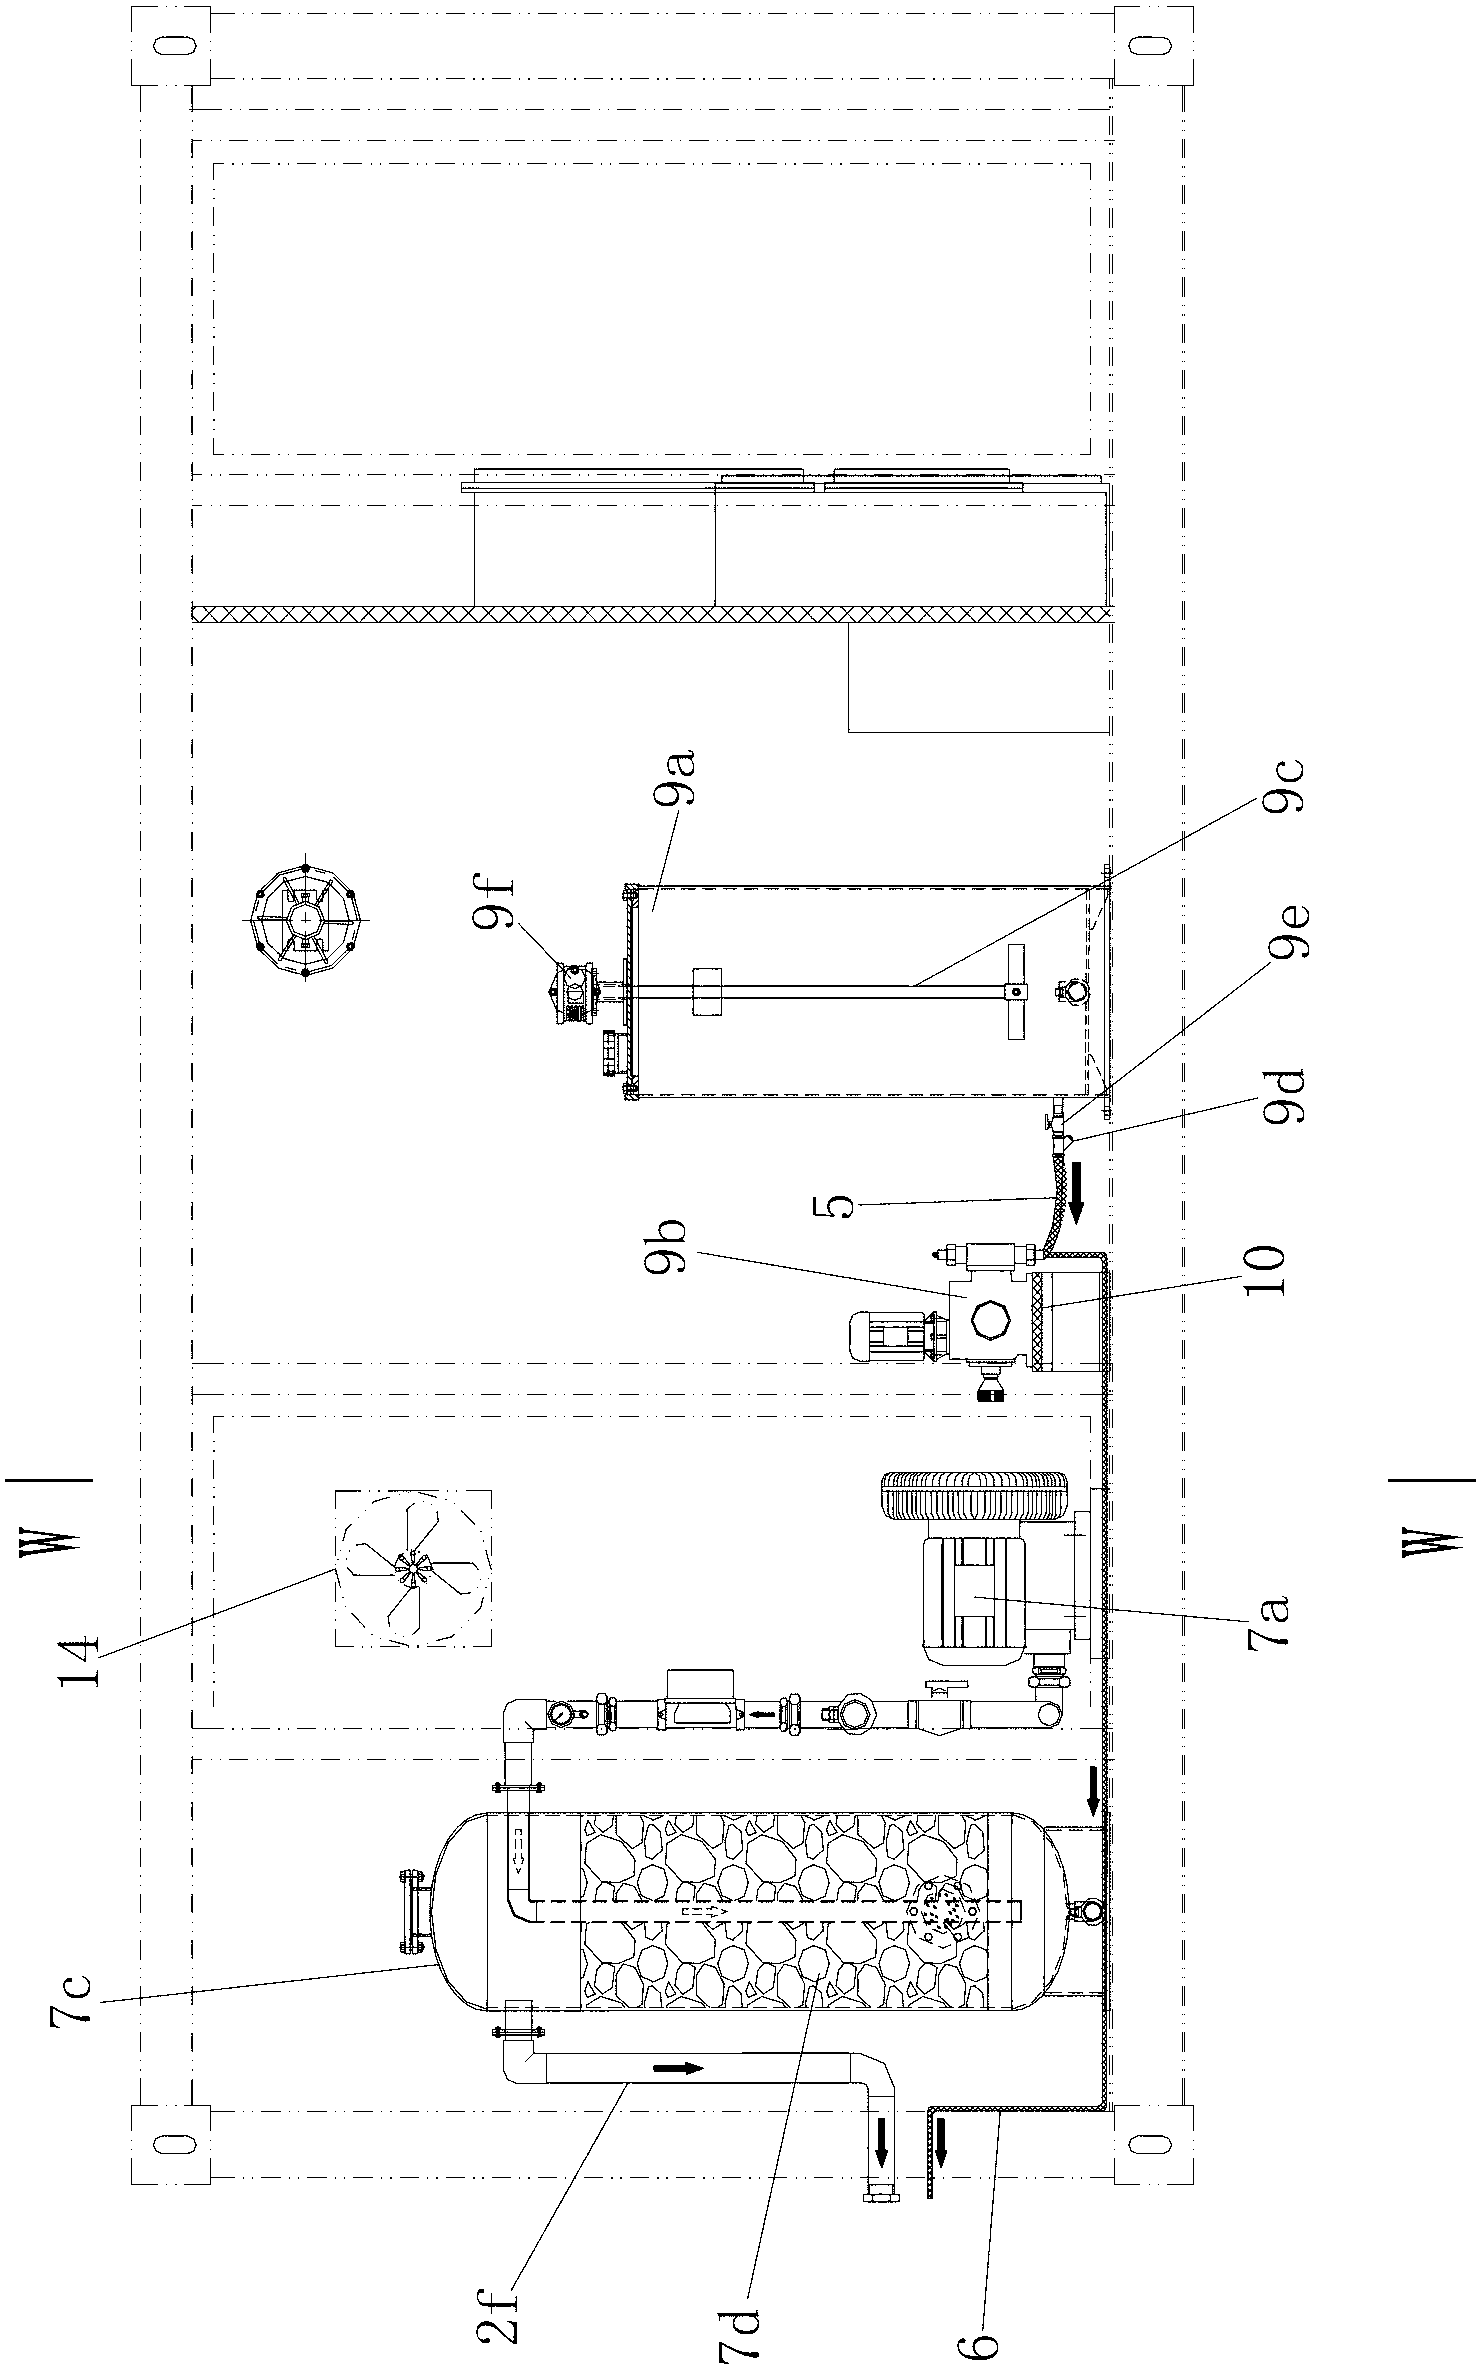 Light oil polluted unsaturated zone soil in-situ remediation apparatus and method thereof